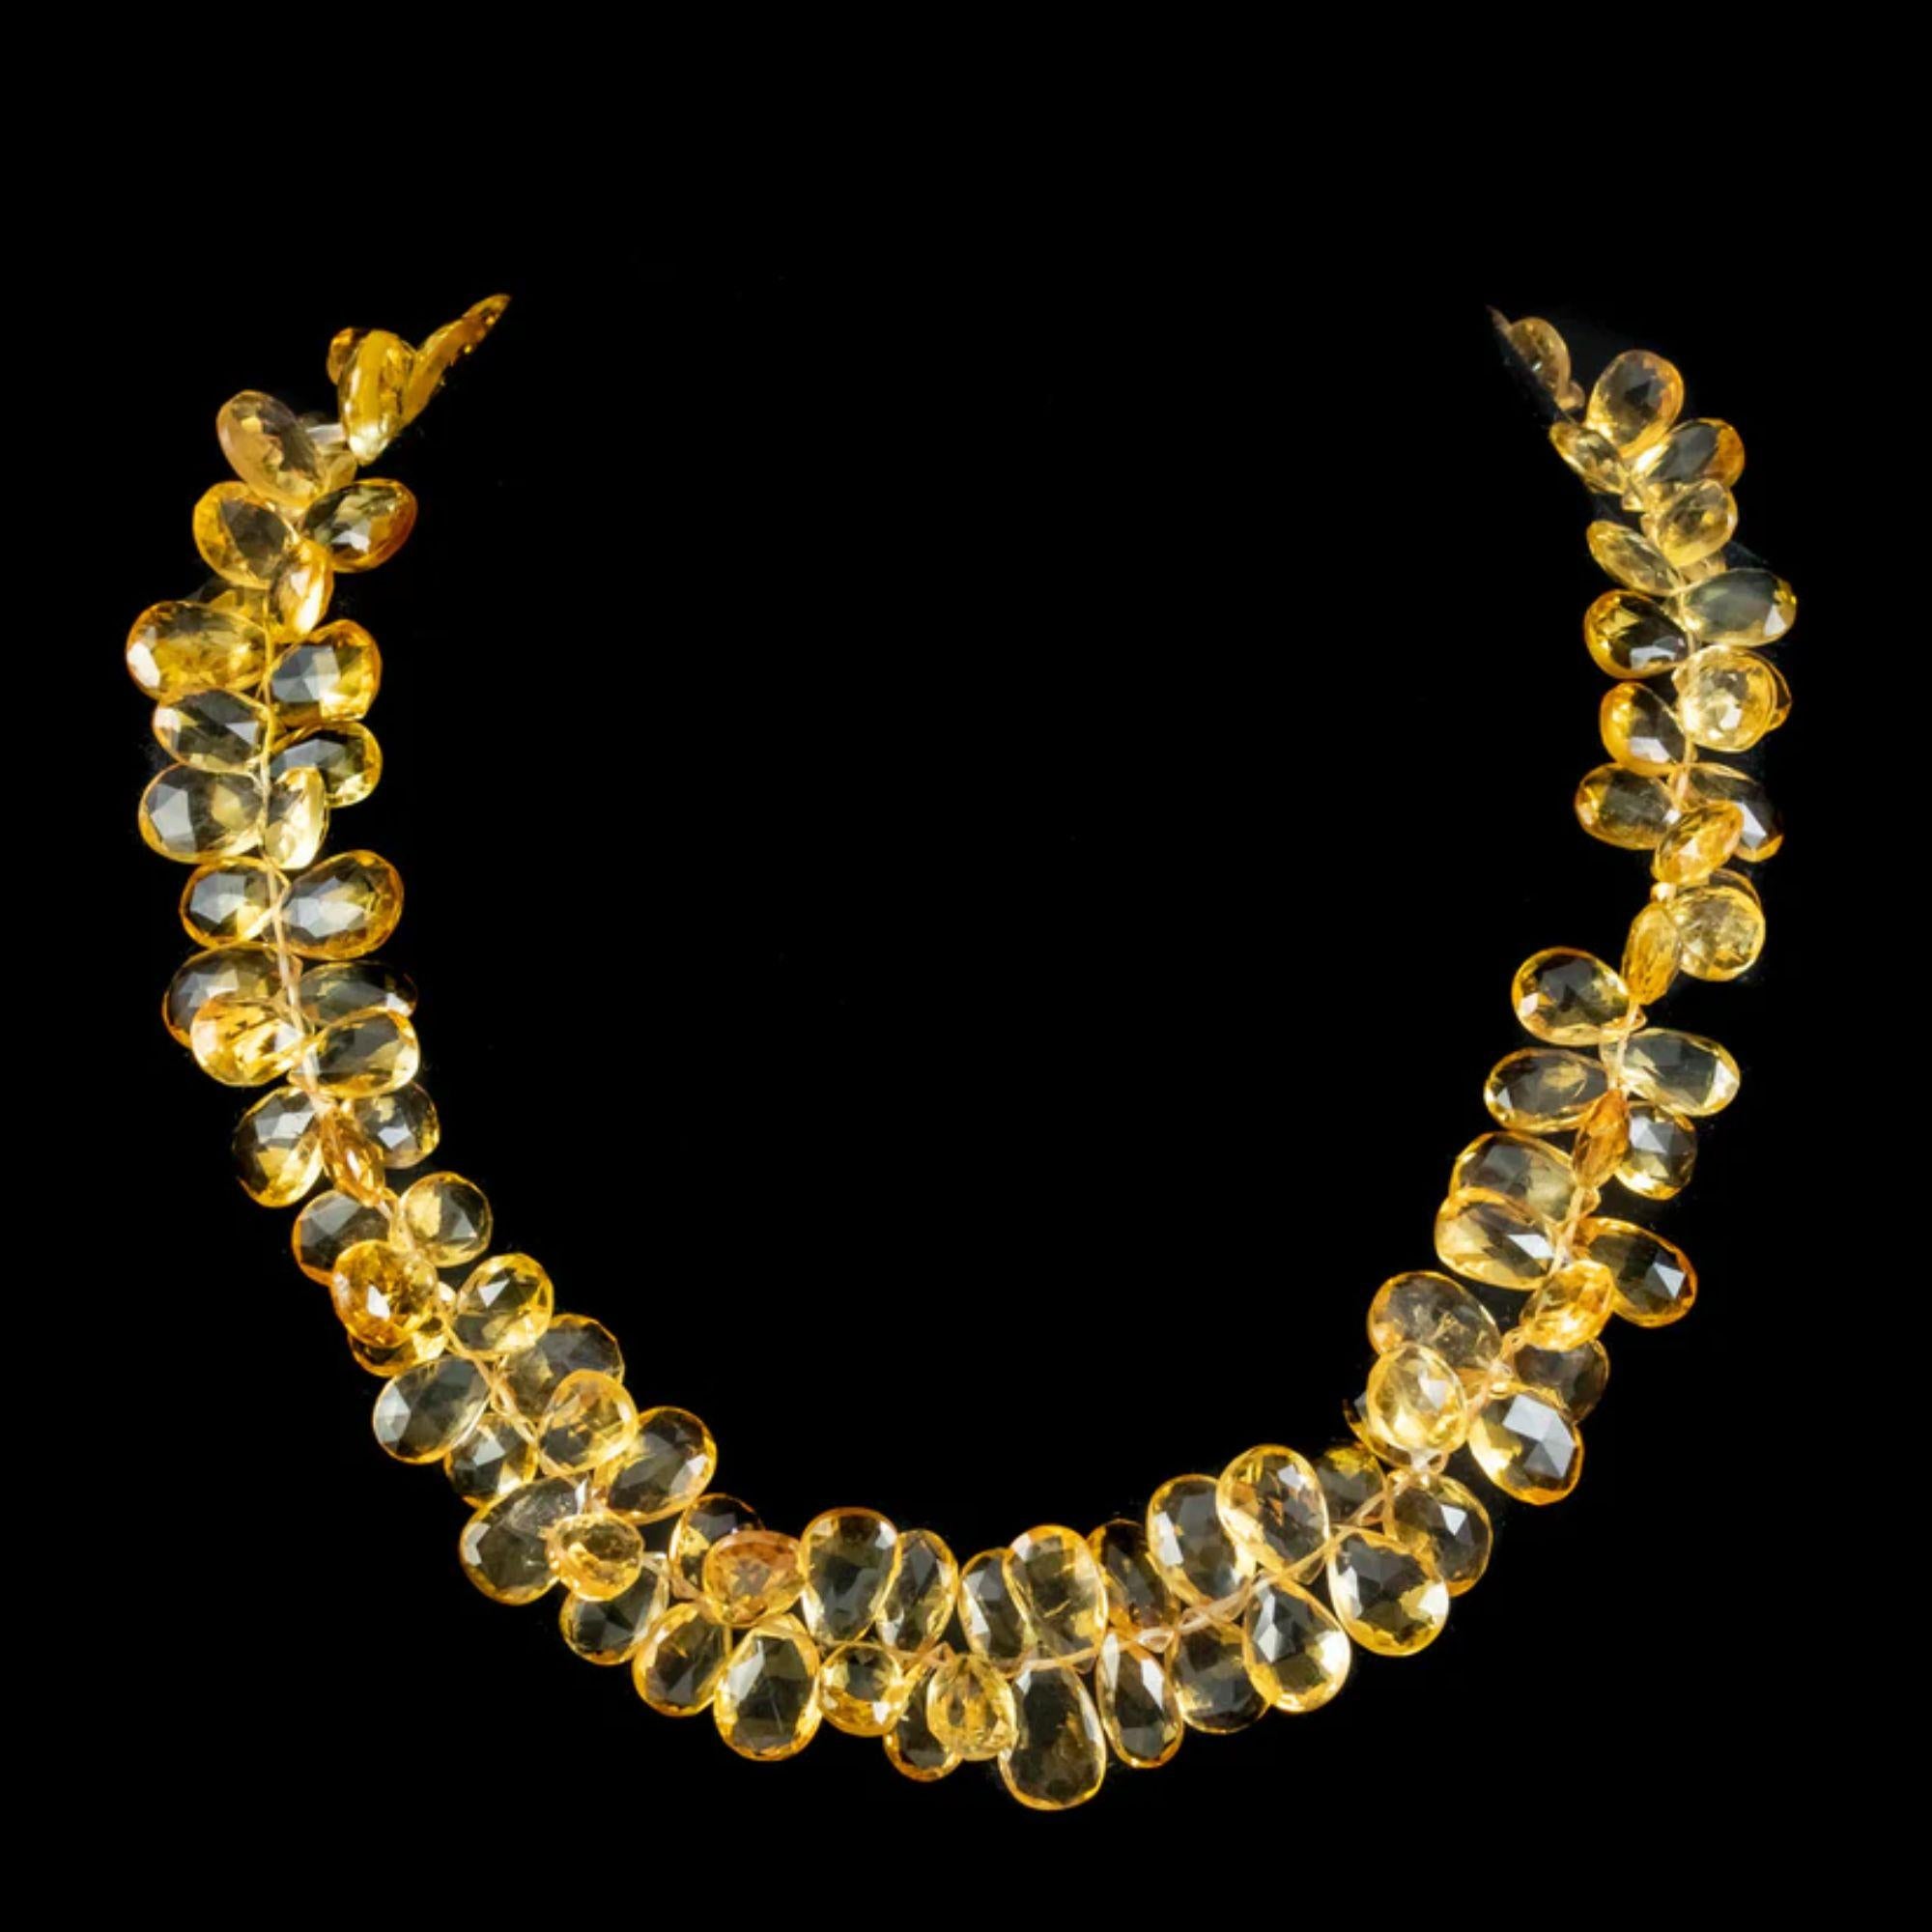 A glorious vintage necklace lined with a dazzling array of briolette cut citrines which have a crisp, radiant quality and golden hue, glowing like sunshine from within. The smallest is approx. 1.70ct and graduate in size to larger 4ct stones. 

It’s